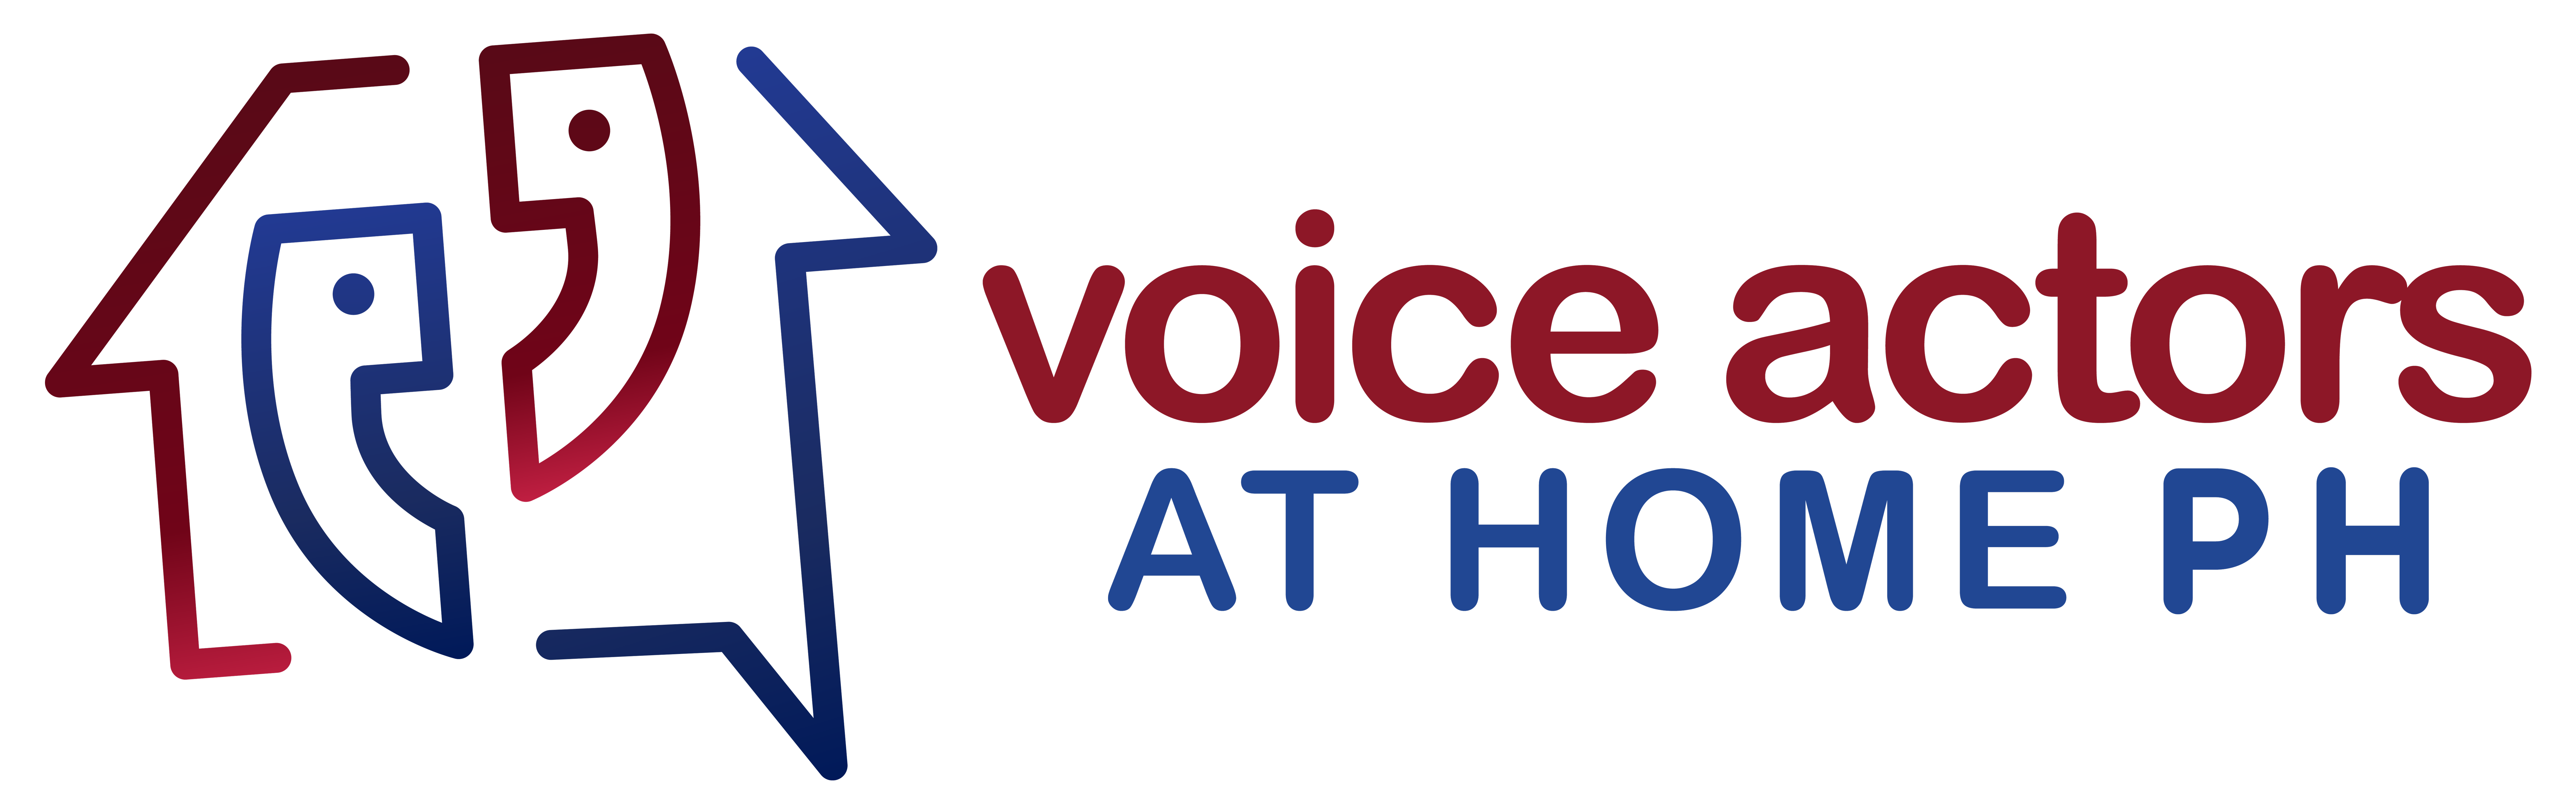 Voice Actors at Home Philippines Helping 200 Filipinos Earn Fulltime